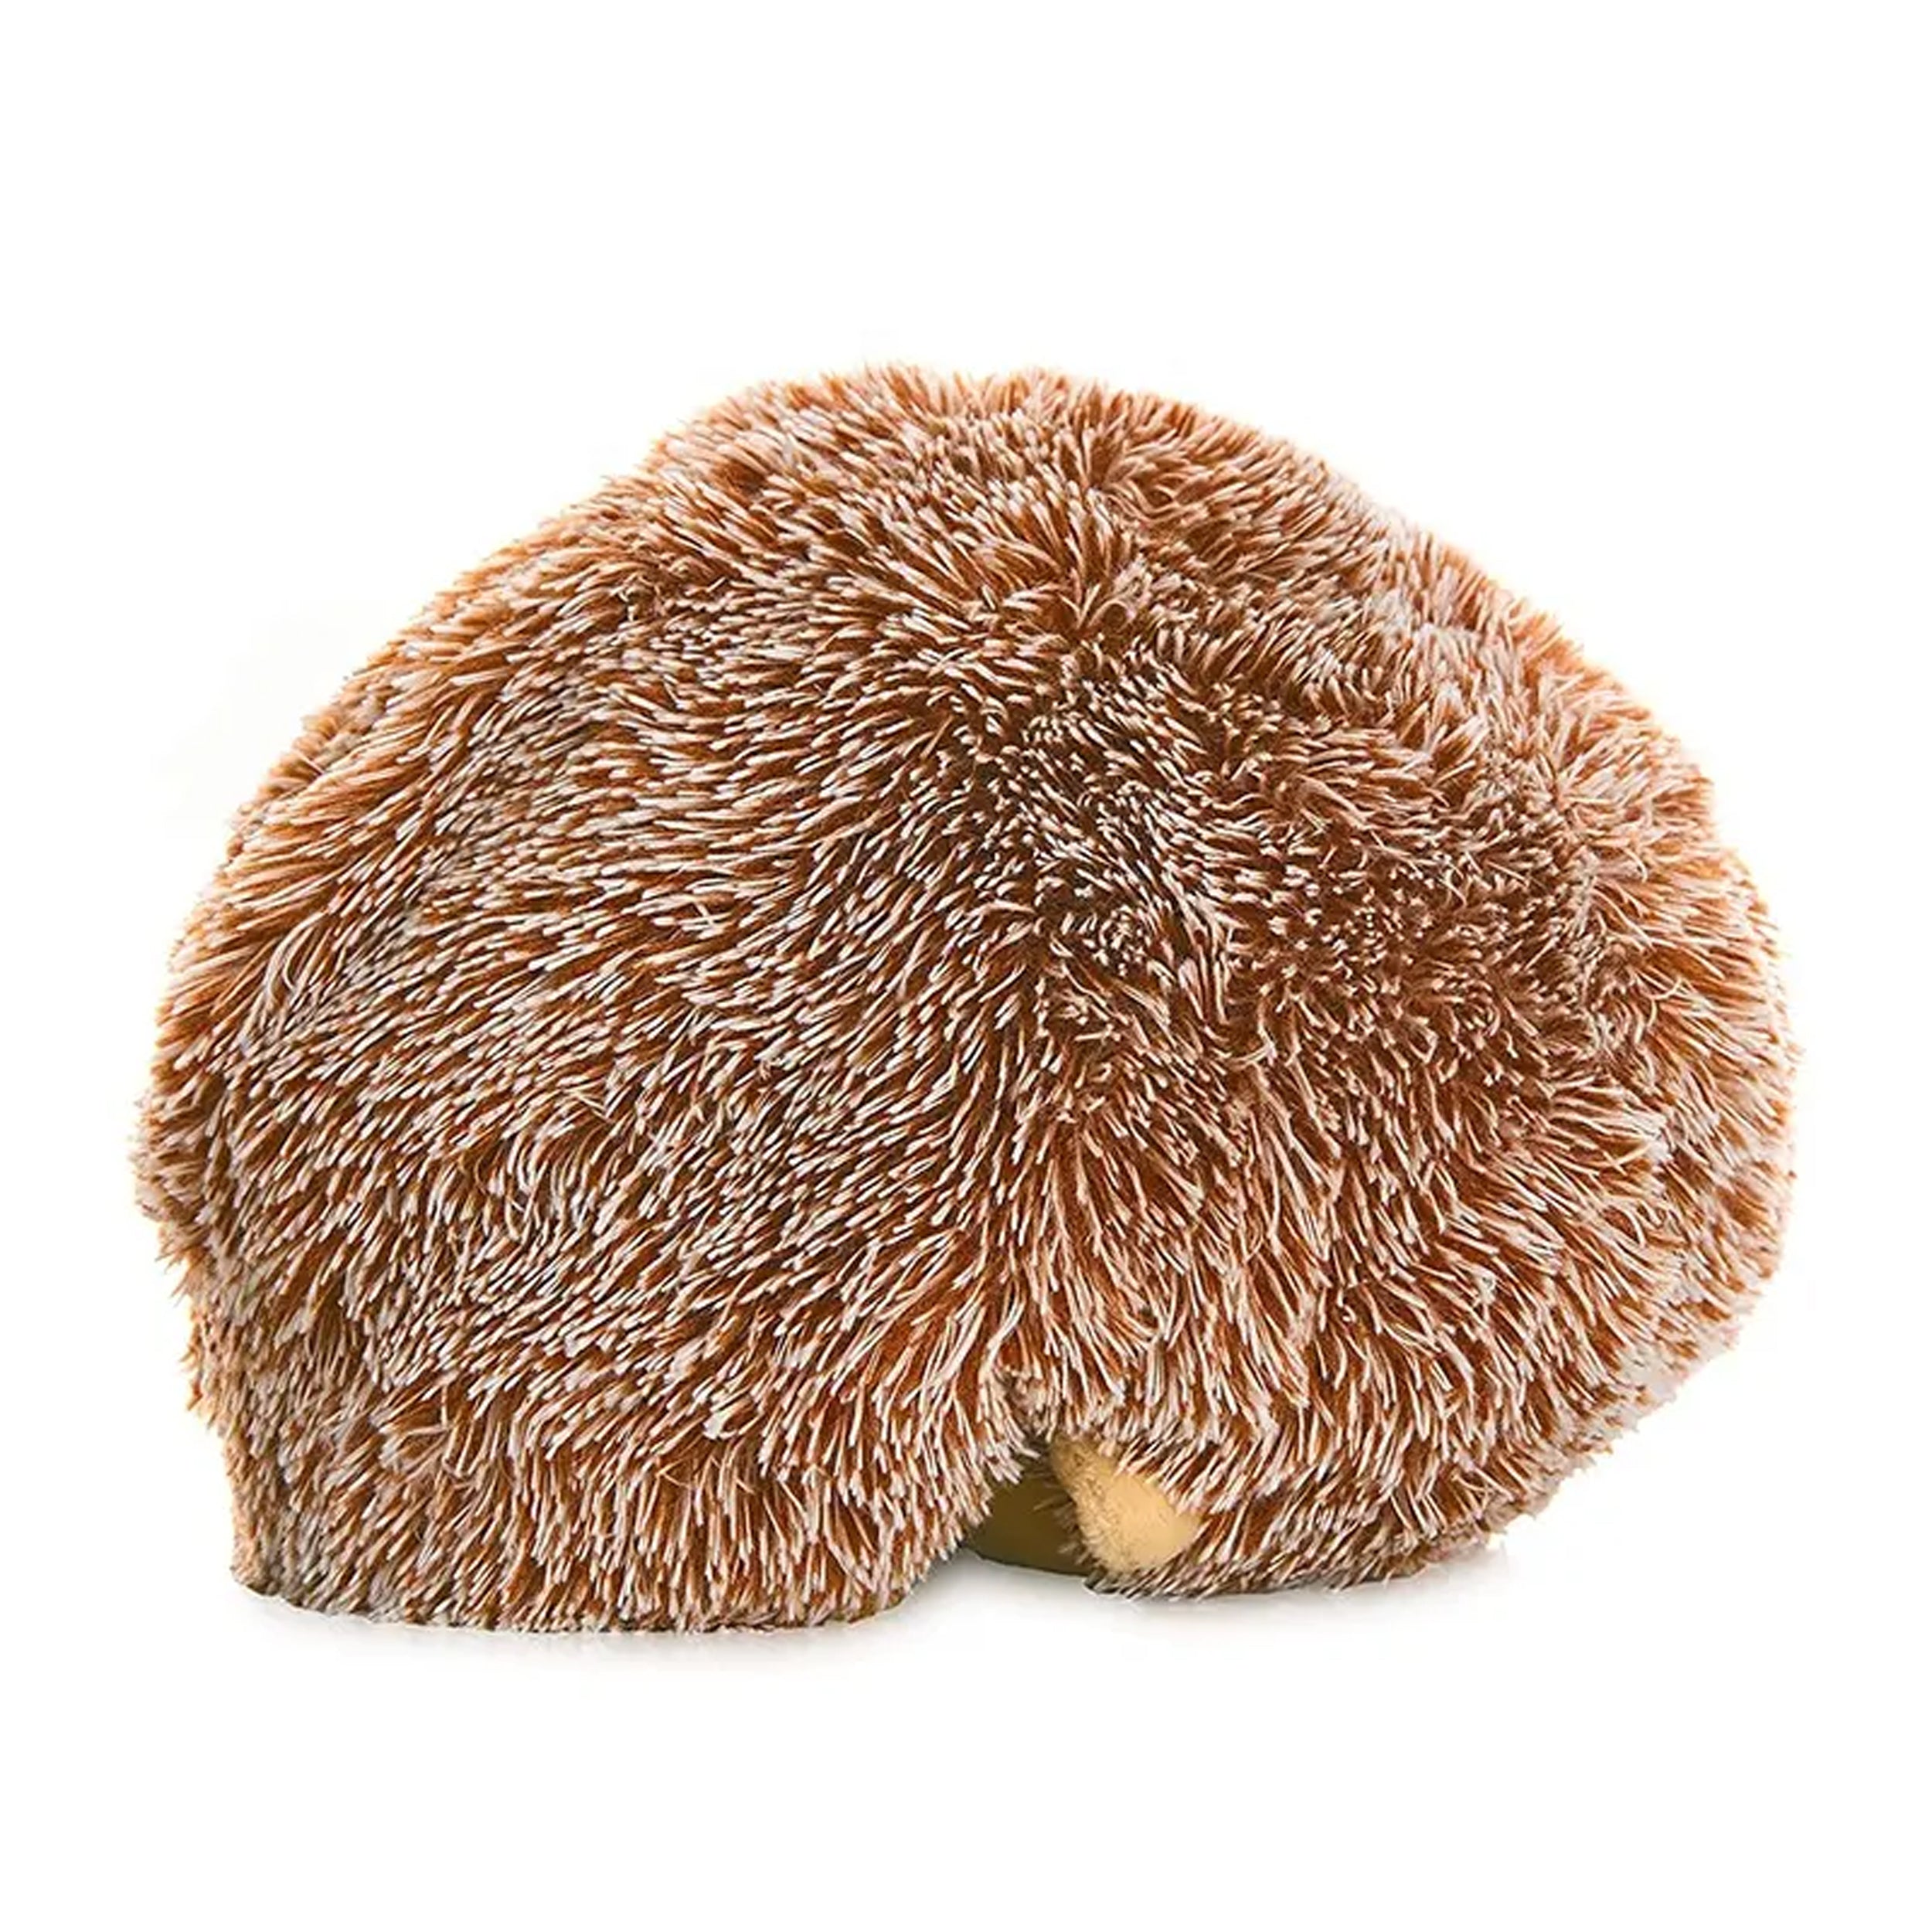 Cute Plush Hedgehog Microwave Wheat Bag Heating Pad for Back Pain Relief